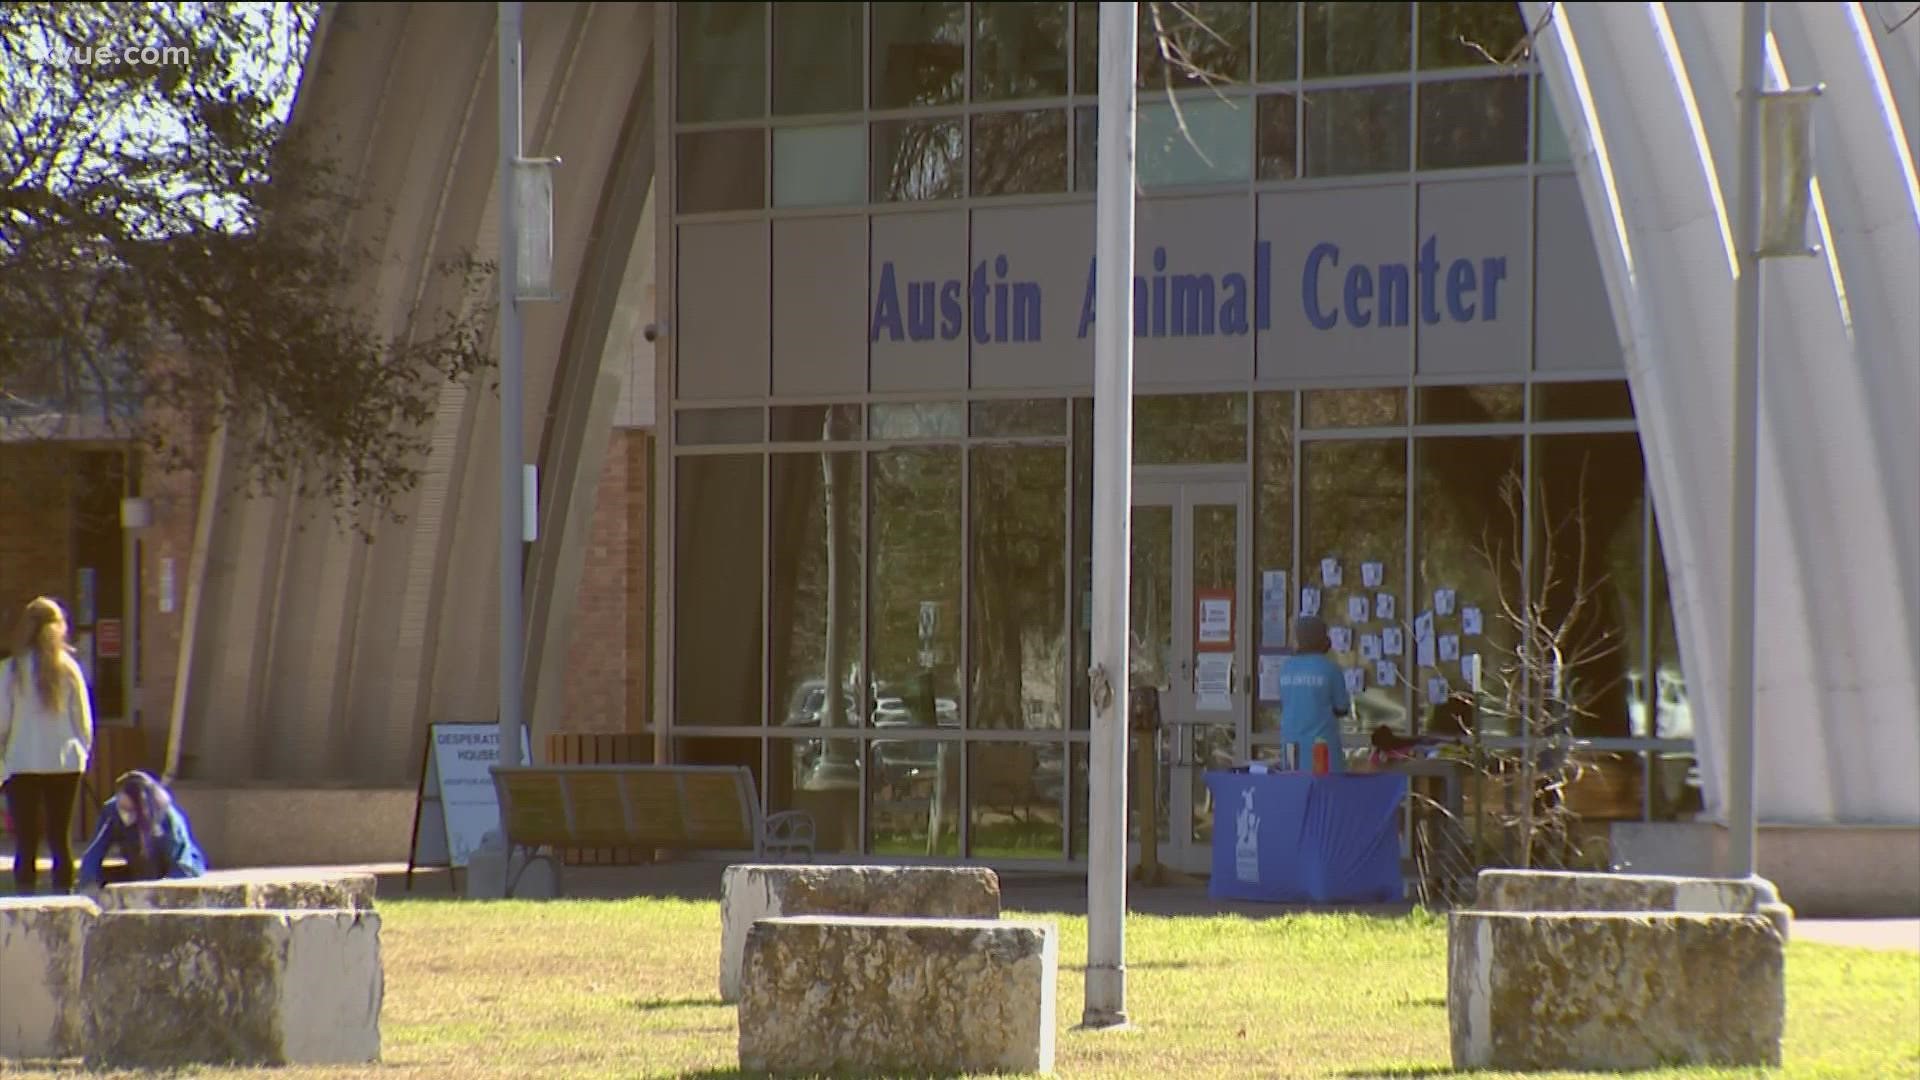 The Austin Animal Center is making adjustments to business hours due to COVID-19 and staffing shortages.